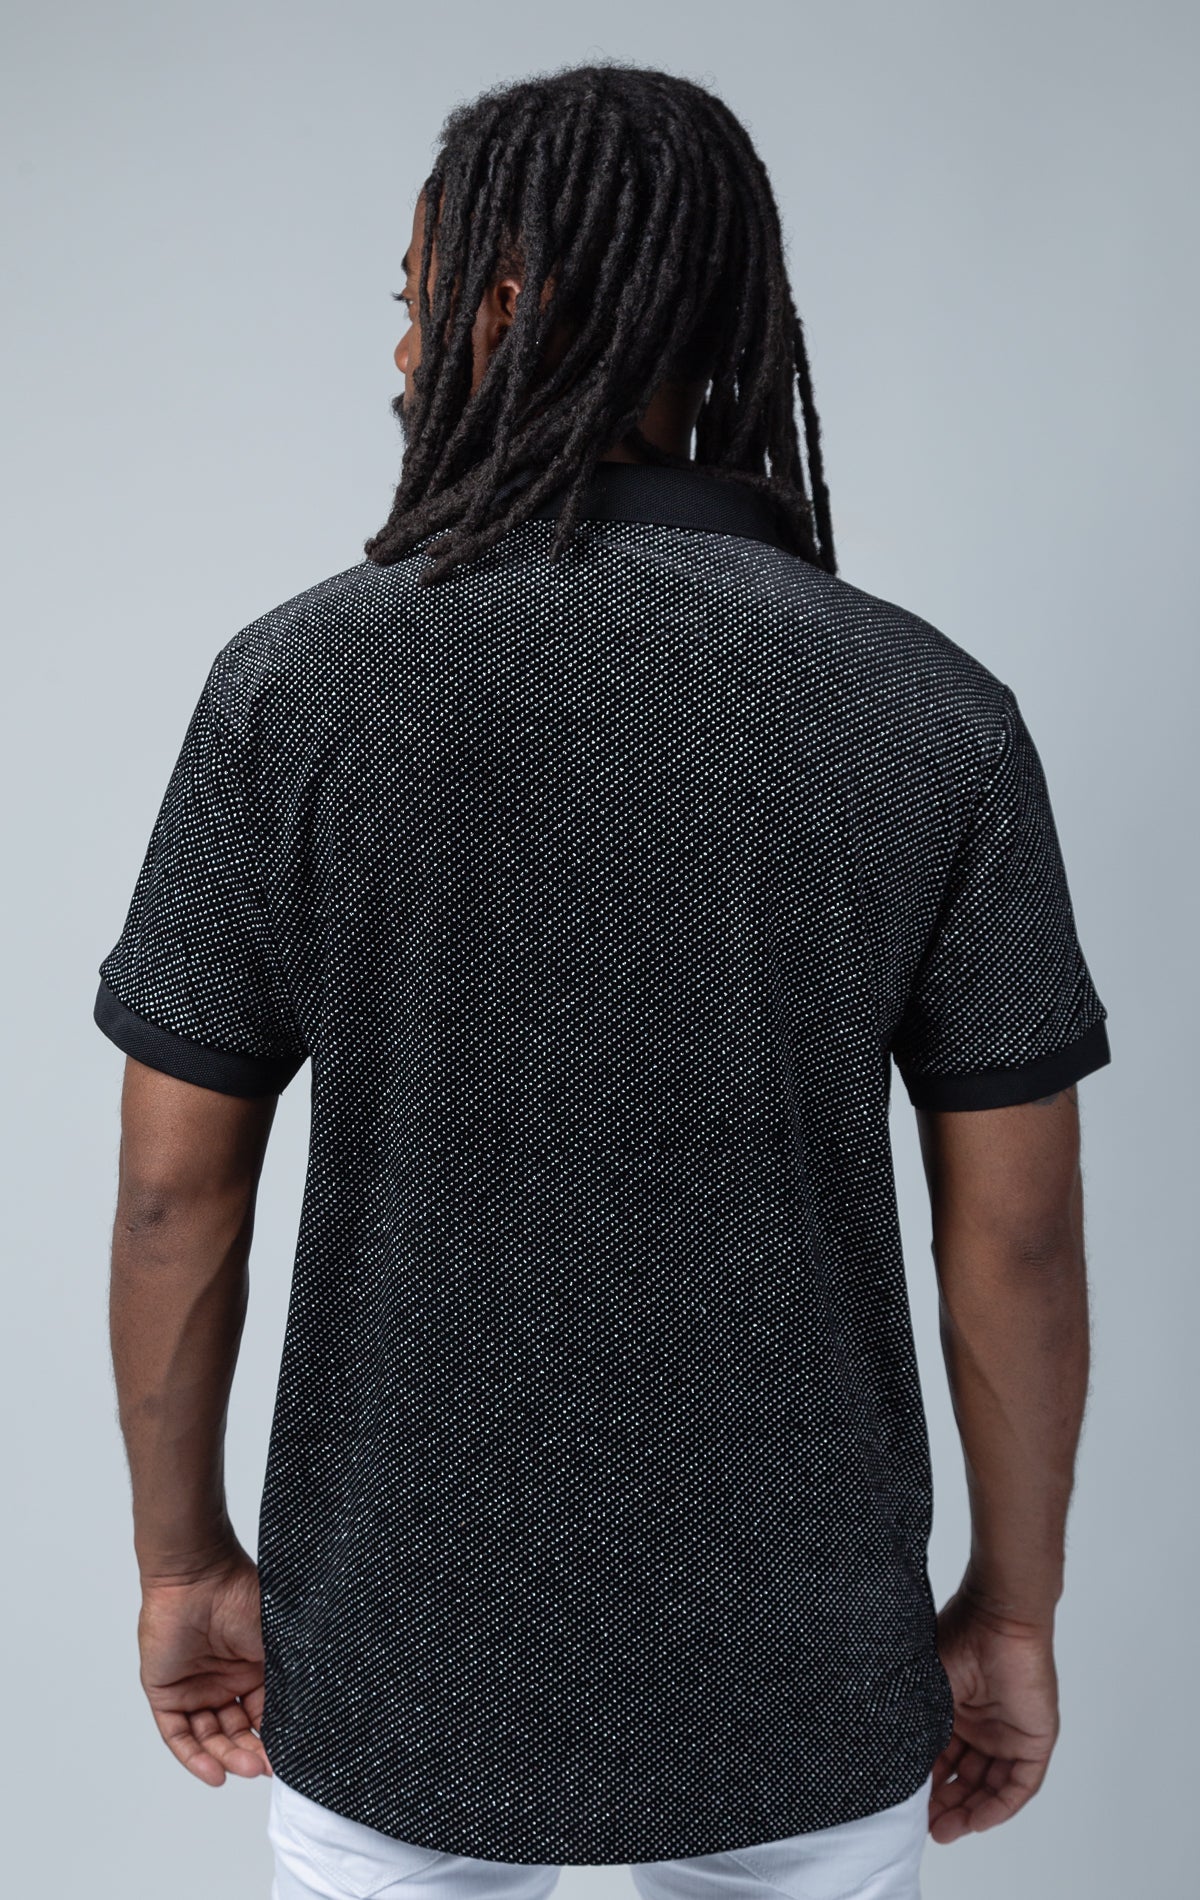 black polo shirt, with a glowing texture